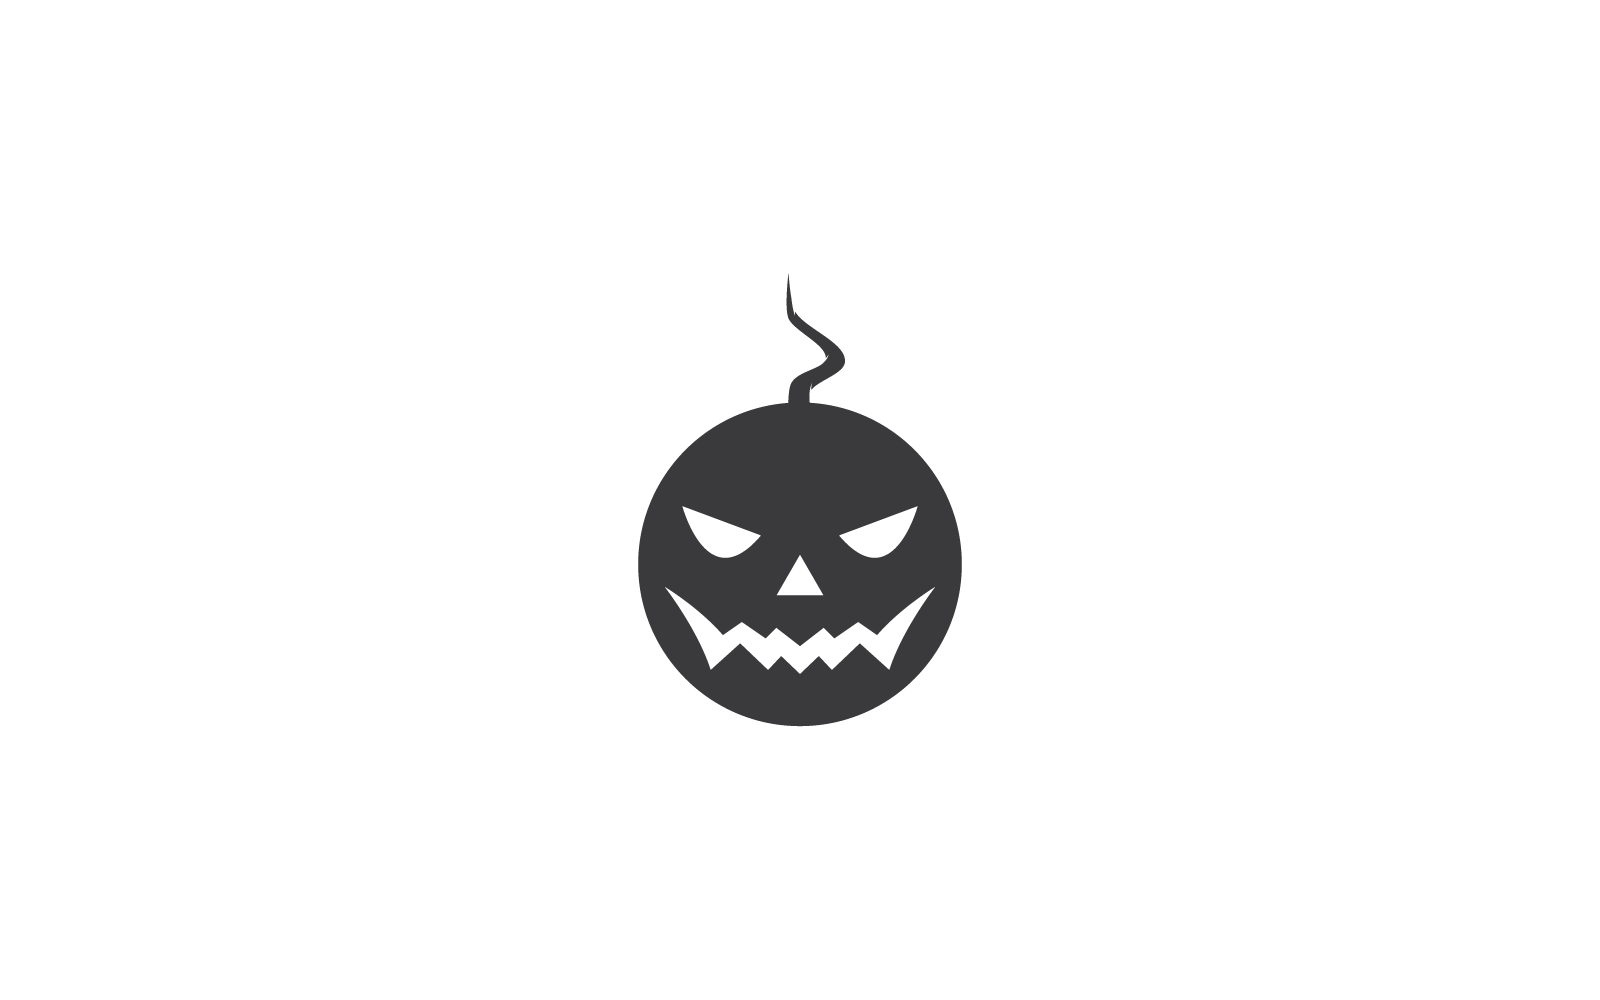 Black Ghost ilustration icon vector template